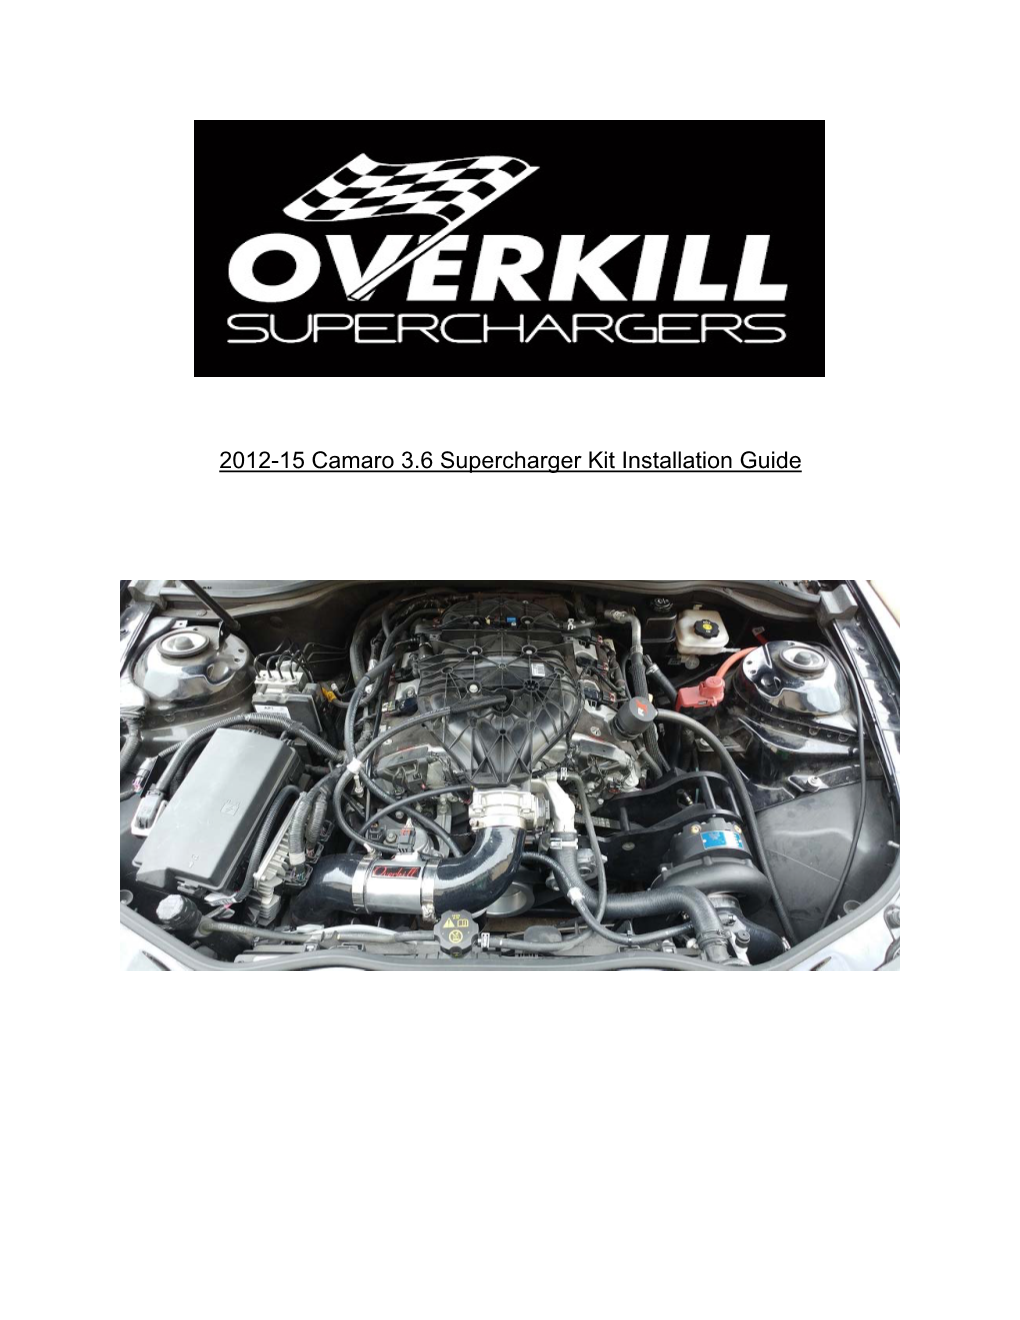 2012-15 Camaro 3.6 Supercharger Kit Installation Guide